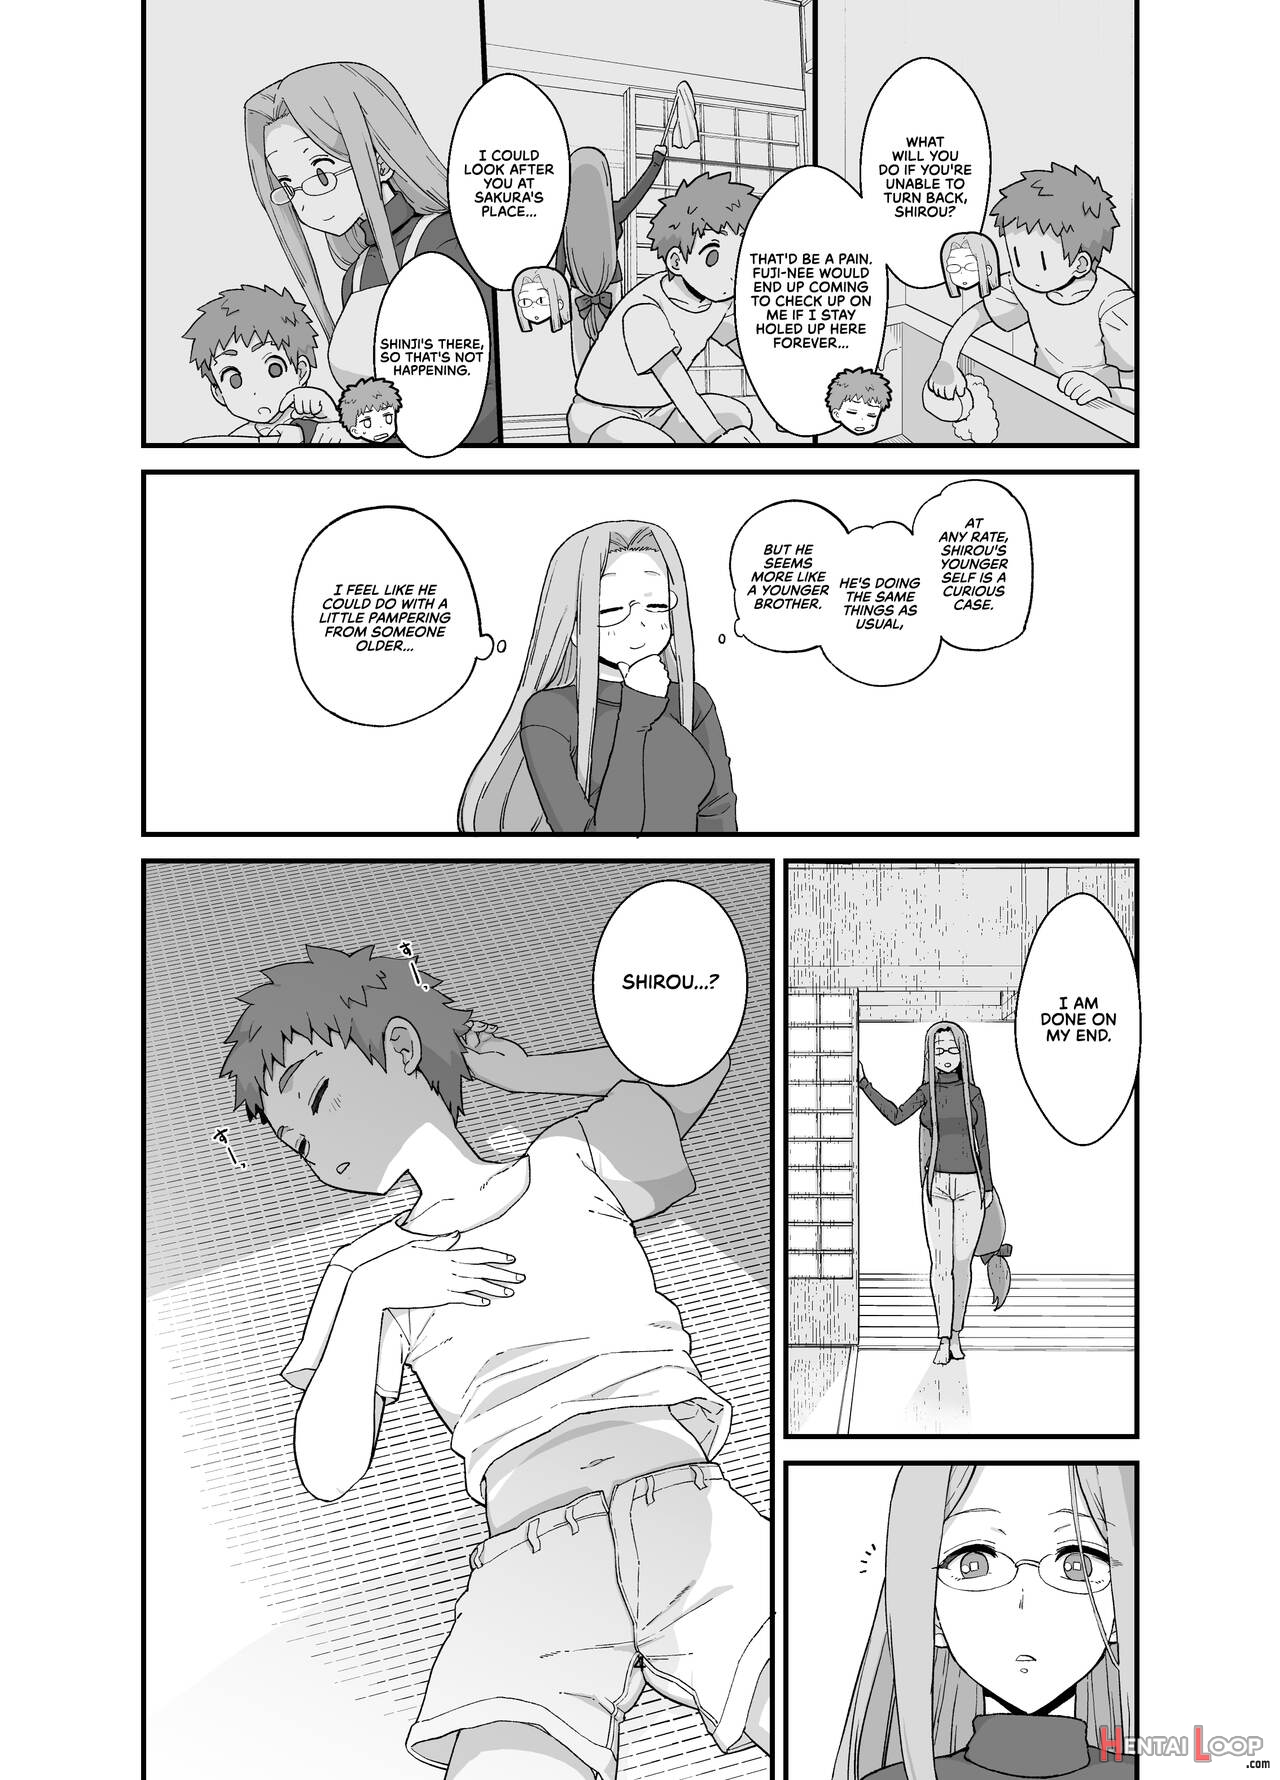 Staying Home With Rider-san page 6